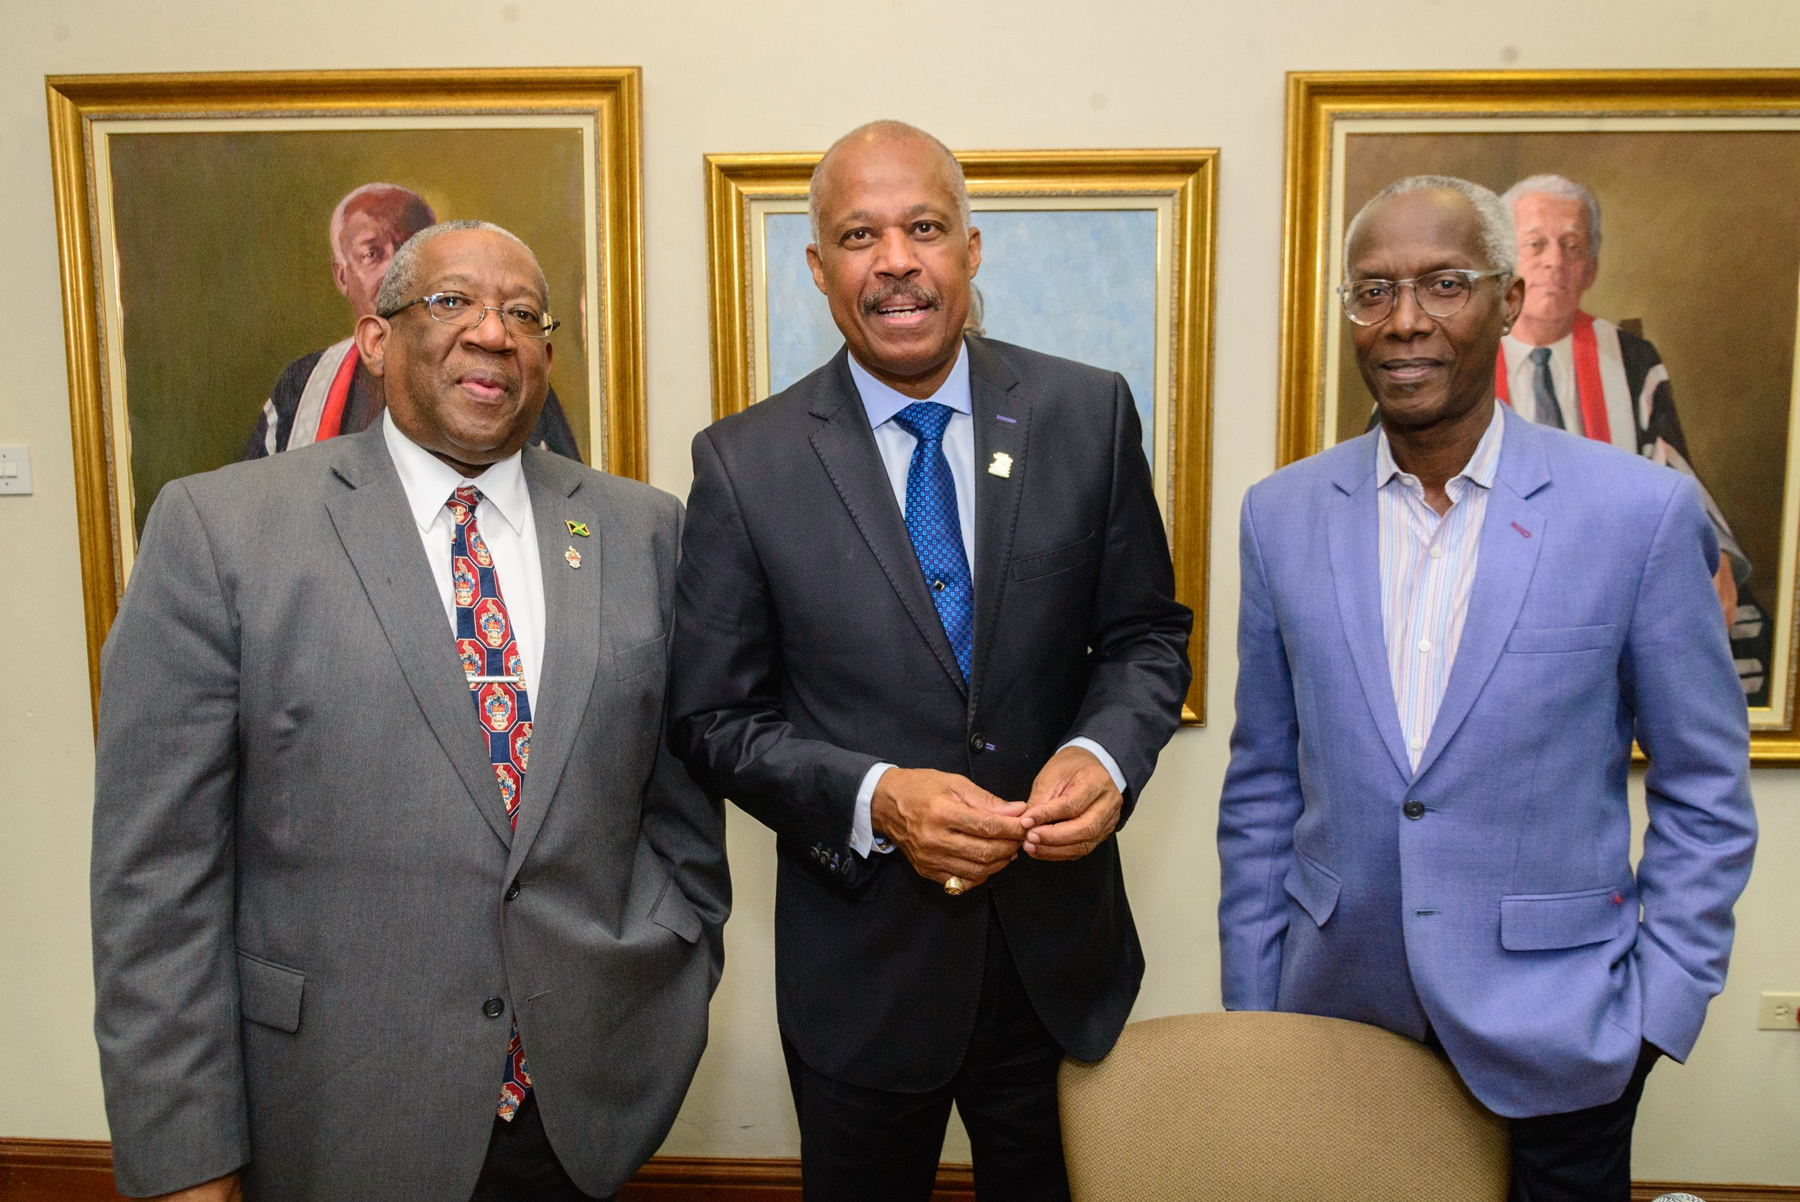 Professor Sir Hilary Beckles (centre), Vice-Chancellor of The UWI, flanked by Pro Vice-Chancellor and Campus Principal of The UWI, Mona, Professor Dale Webber (left) and University Registrar, Mr. C. William Iton at the Media Conference to announce The UWI Five Islands Campus